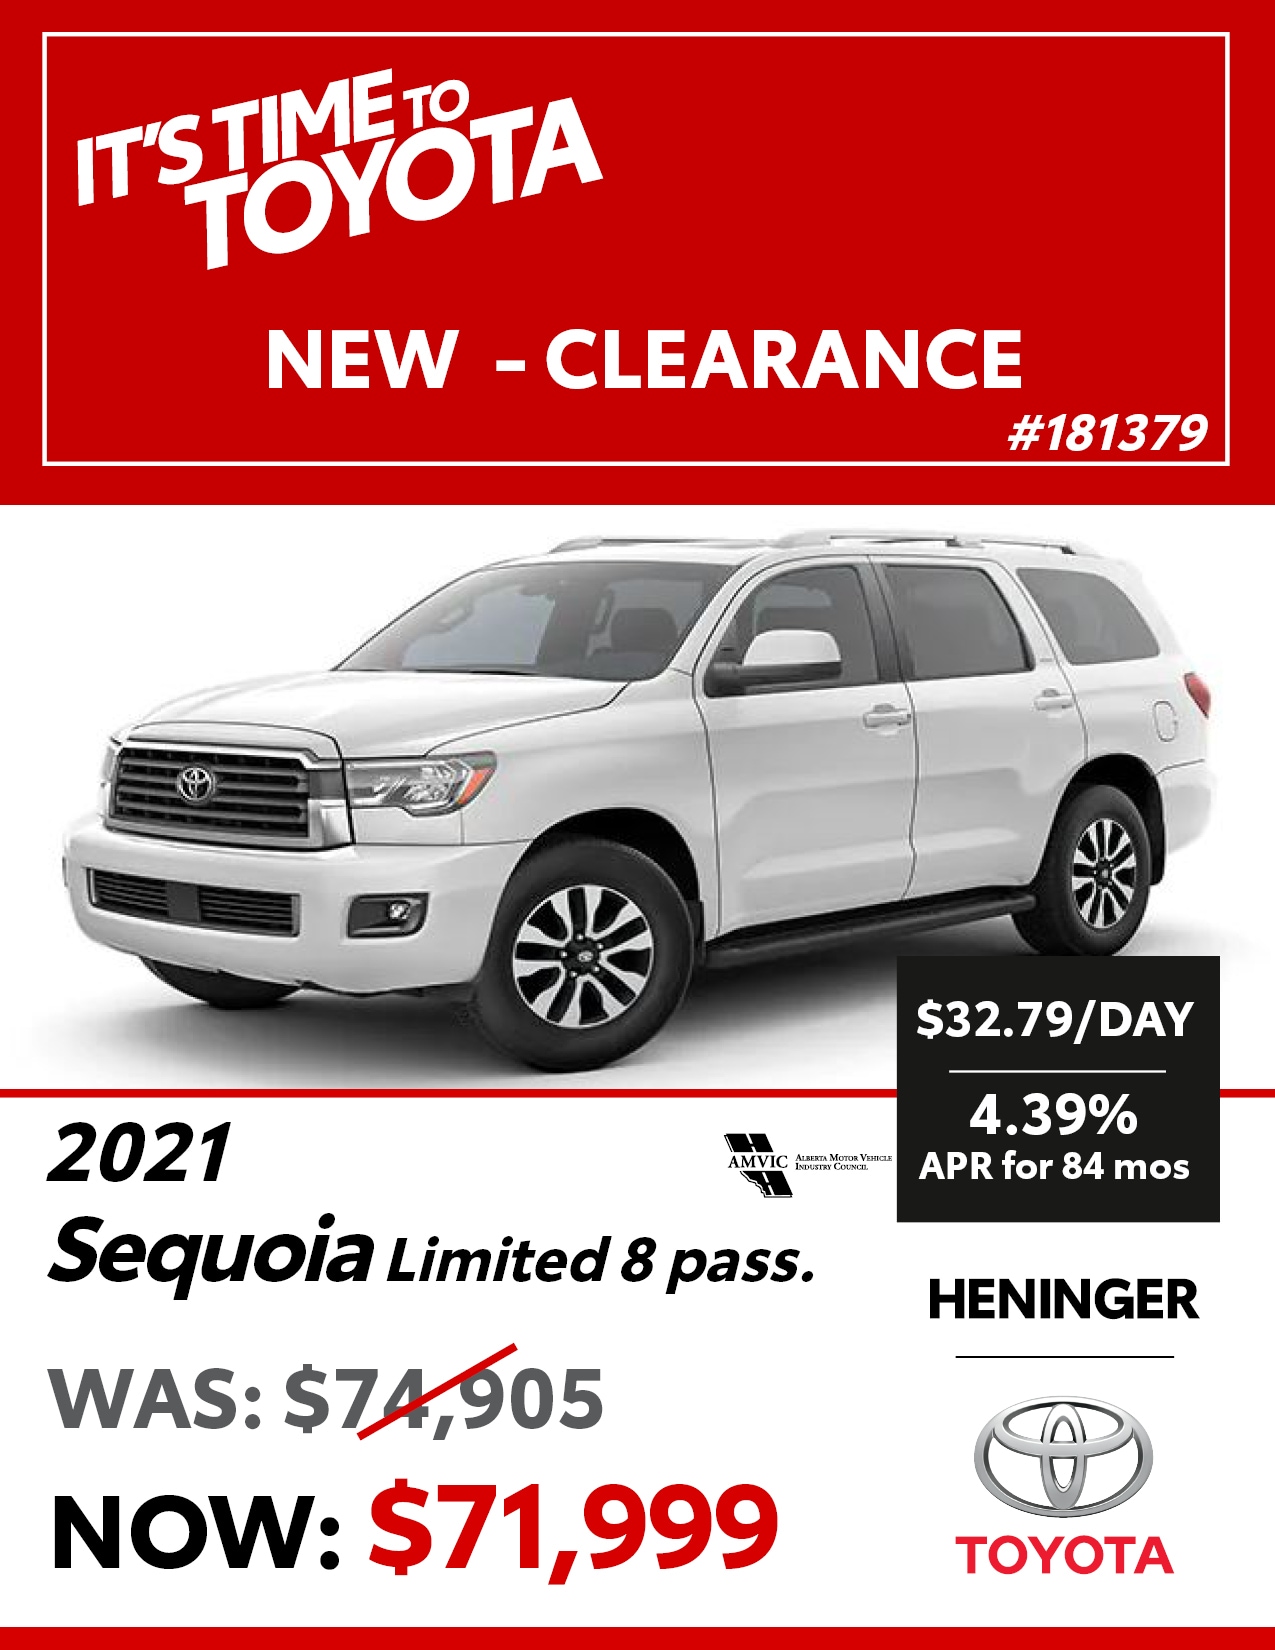 CLEARANCE TOYOTA INVENTORY Heninger Toyota